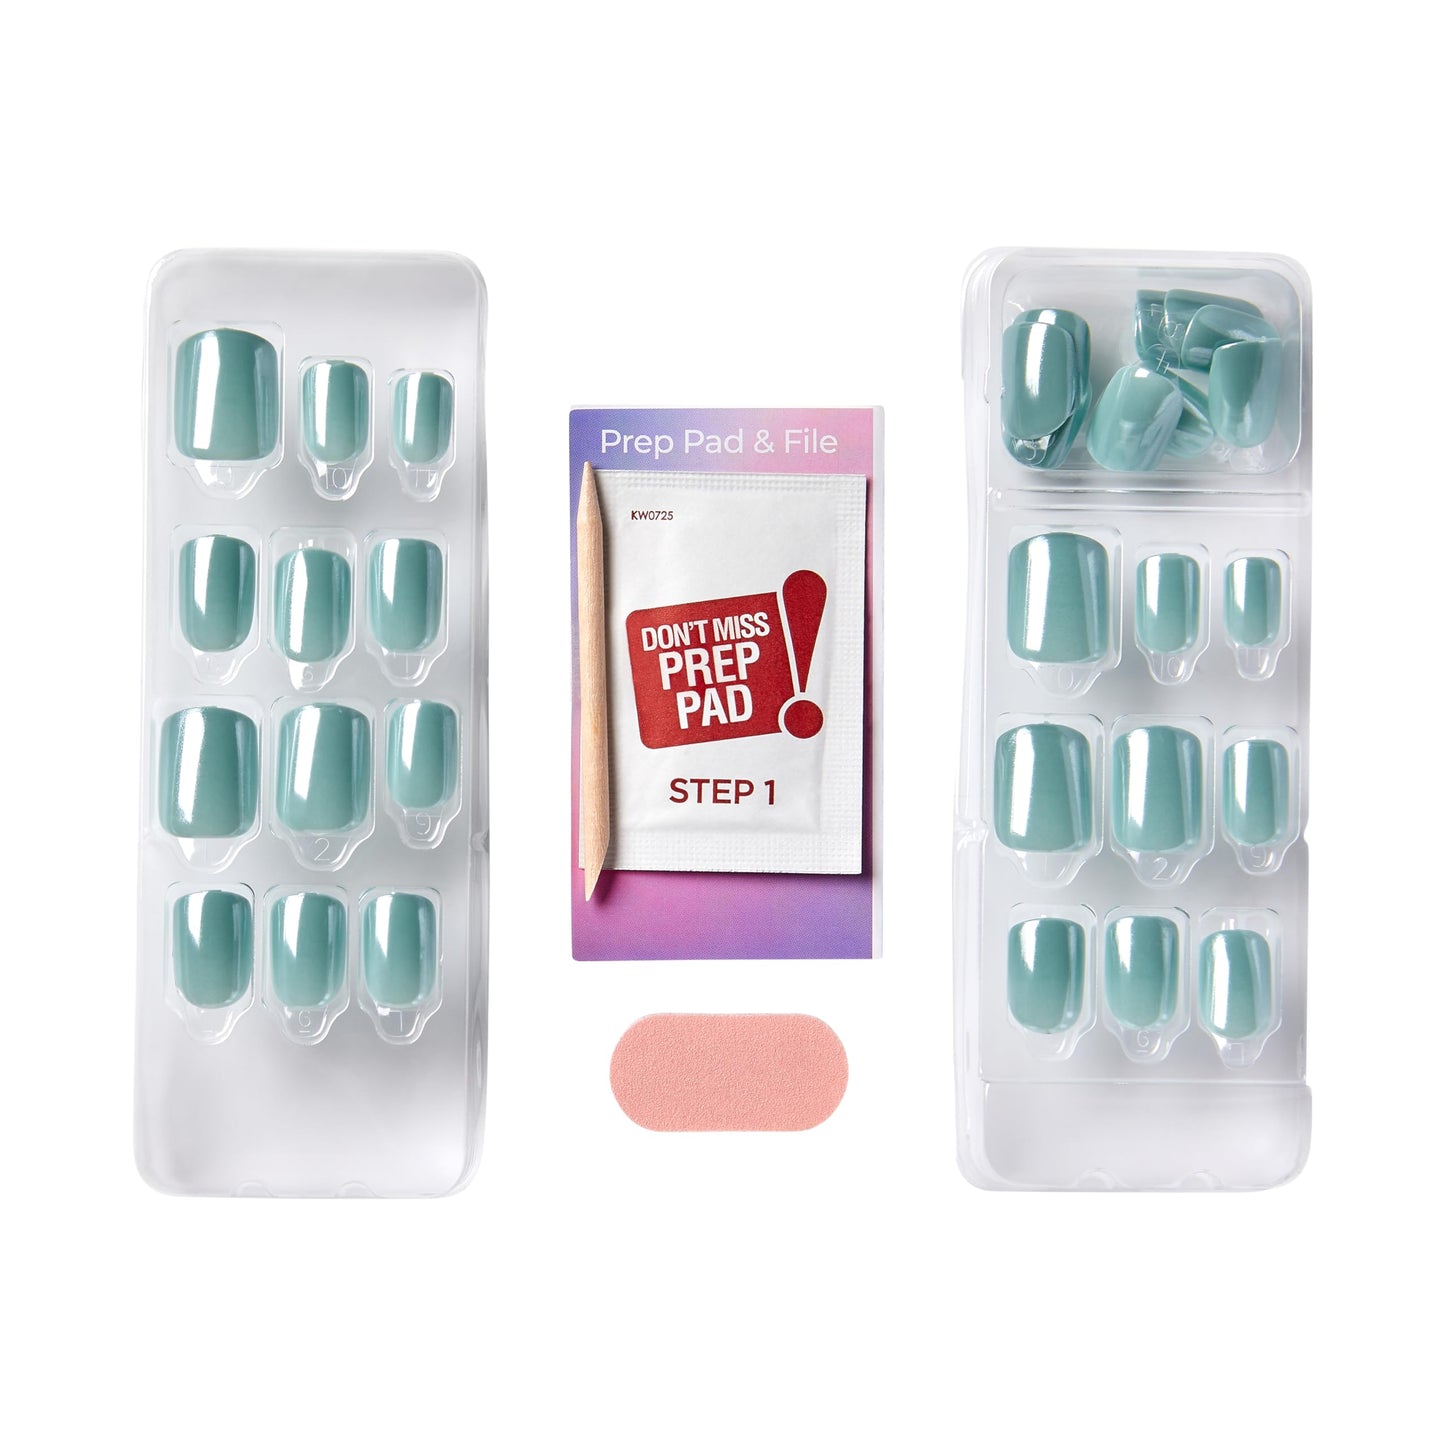 KISS imPRESS No Glue Mani Press-On Nails, Color FX, After Hours', Medium Green, Short Size, Squoval Shape, Includes 30 Nails, Prep Pad, Instructions Sheet, 1 Manicure Stick, 1 Mini File